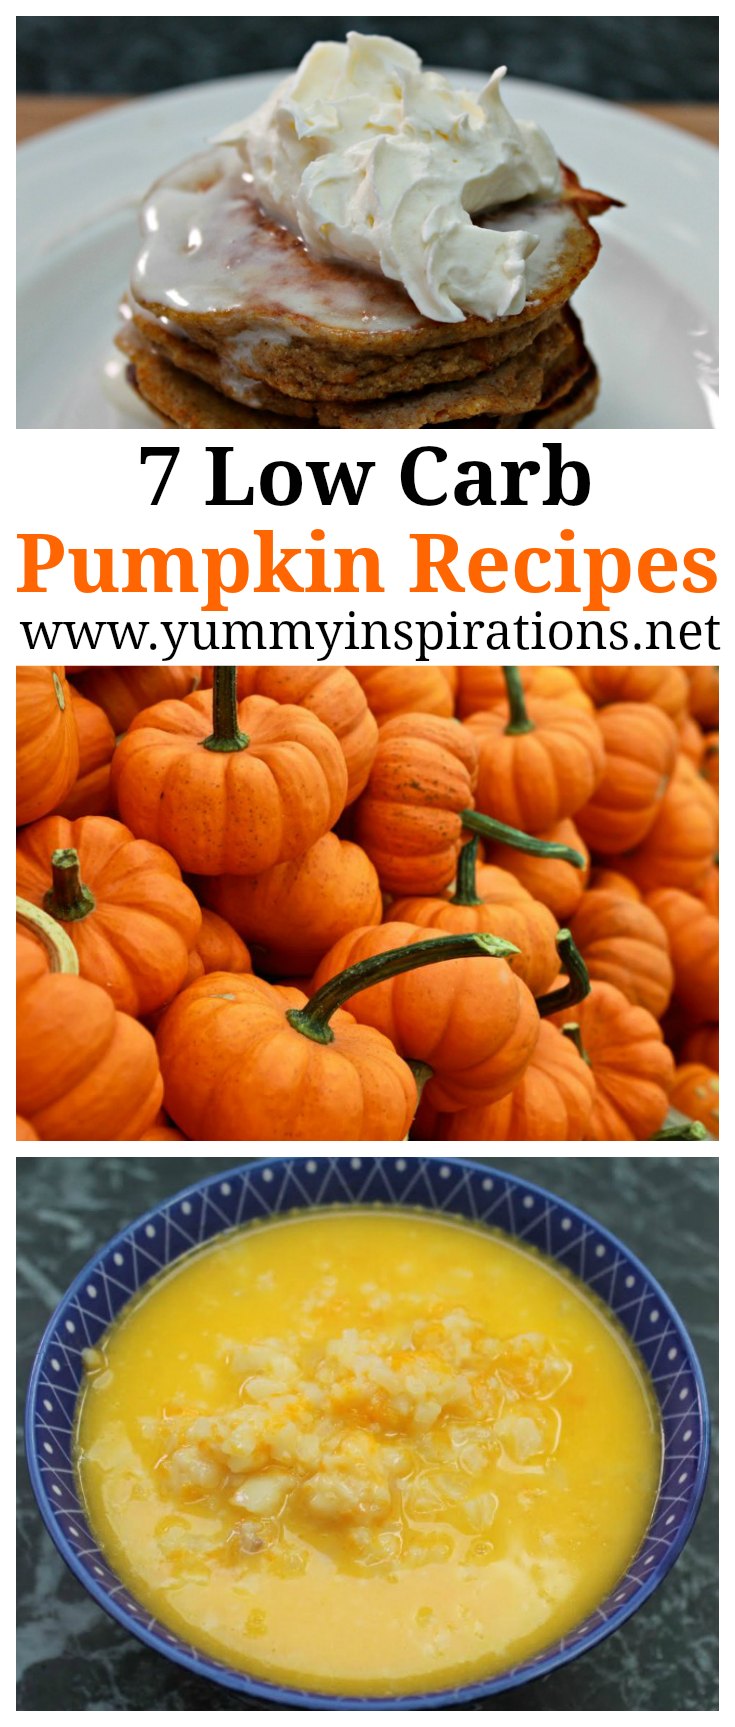 7 Low Carb Pumpkin Recipes - Easy Keto Diet Friendly pumpkin recipe ideas including pancakes, salad, pie, bread and more.